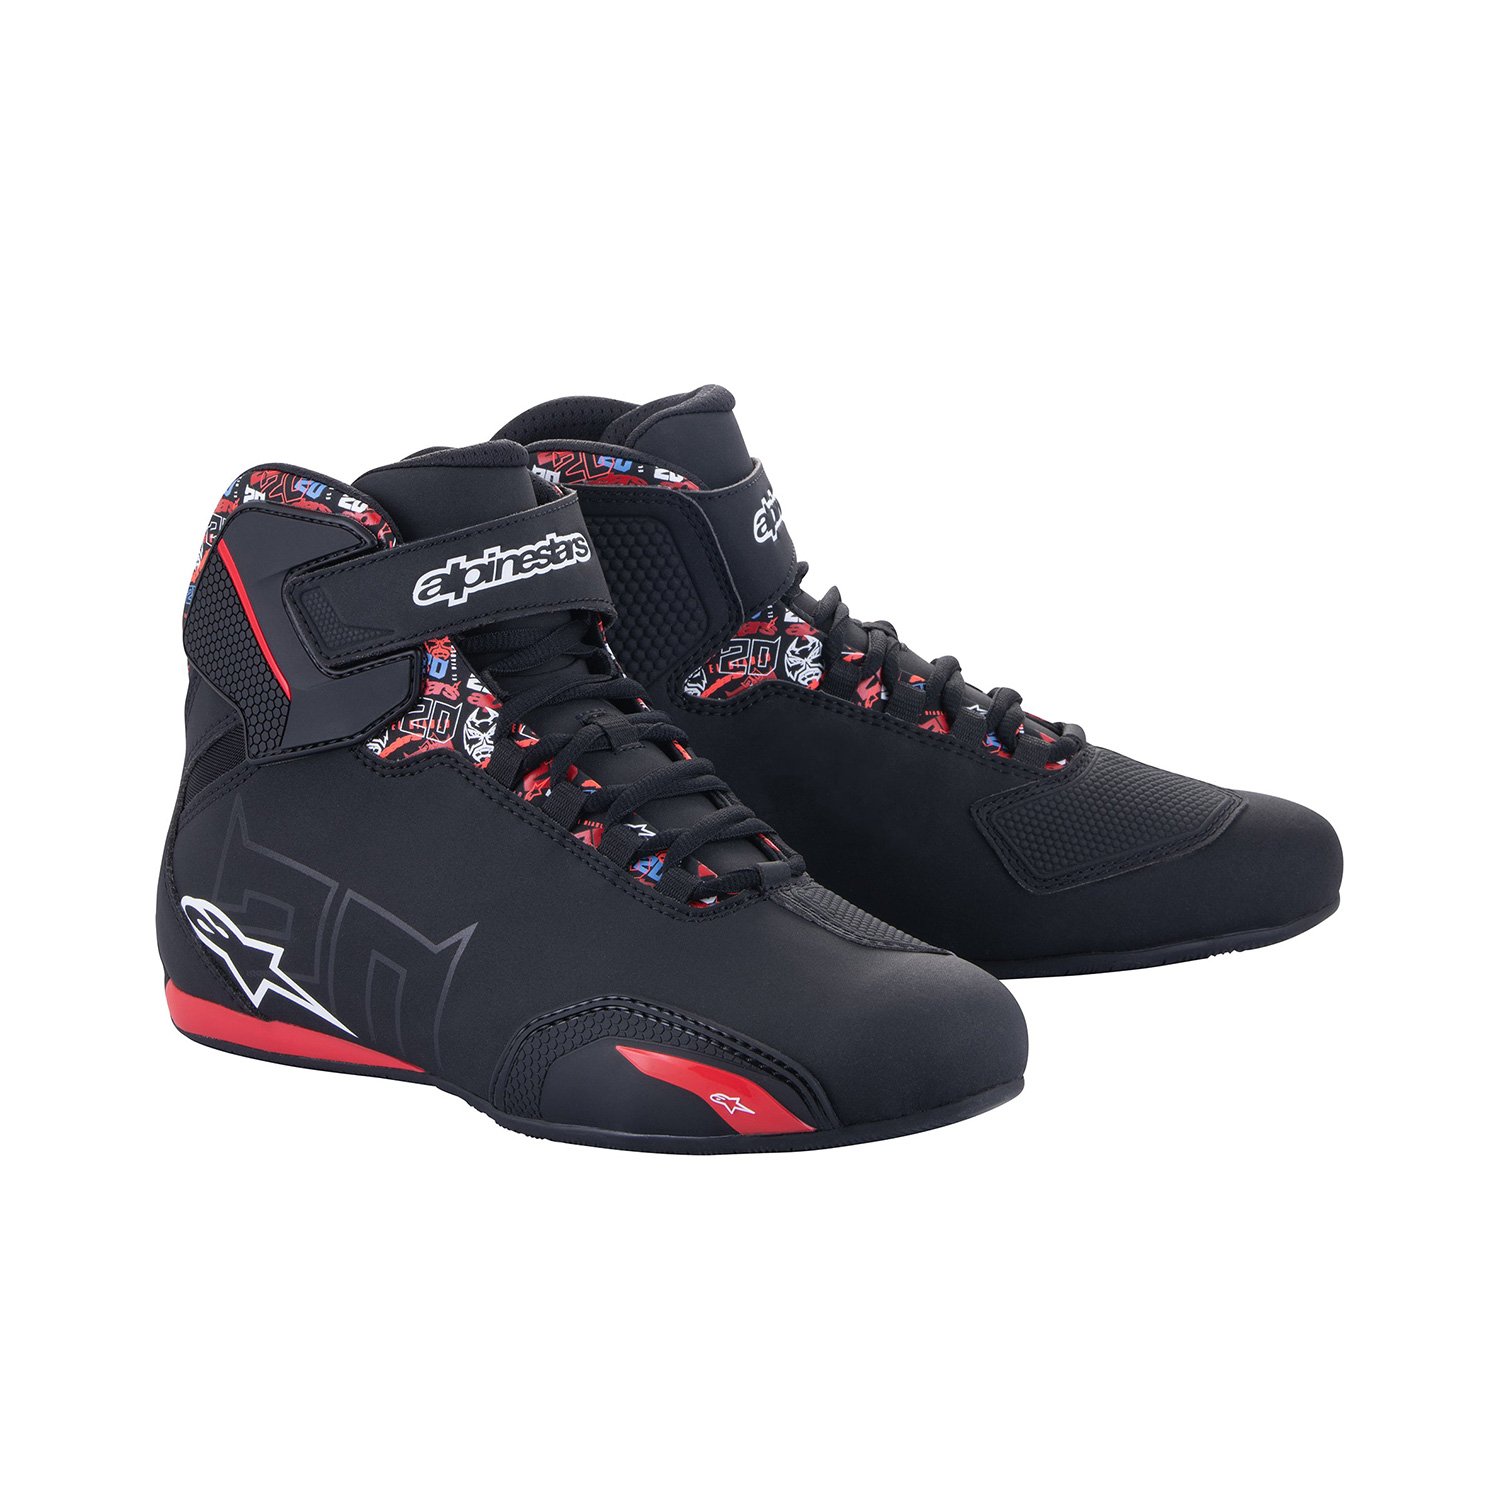 Image of EU Alpinestars FQ20 Sektor Noir Bright Rouge Chaussures Taille US 6